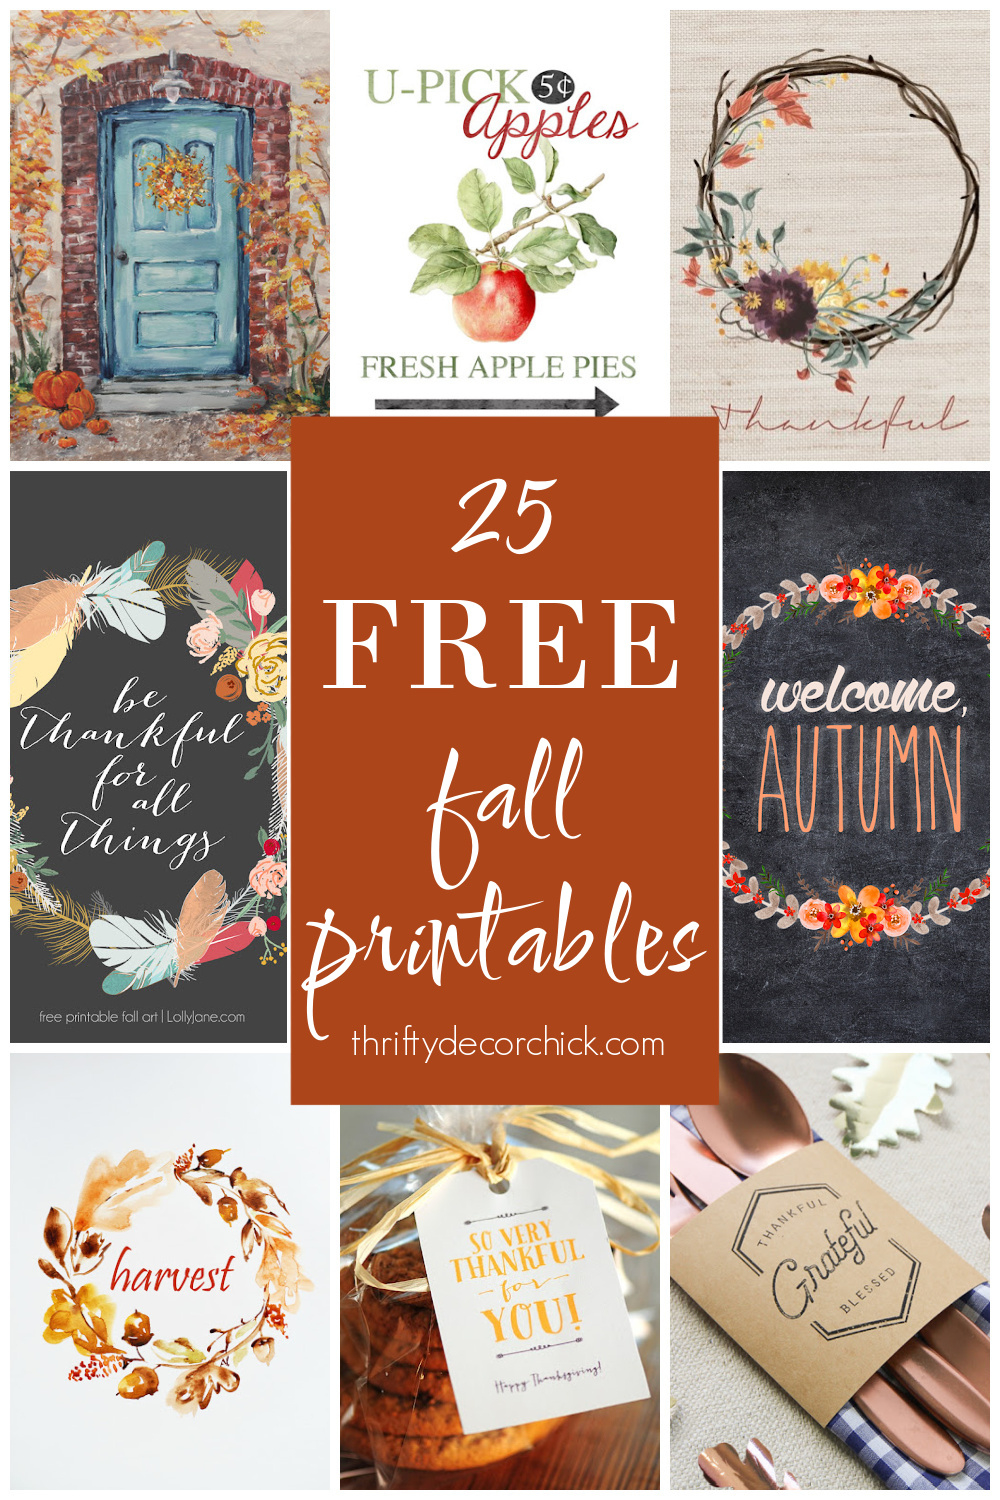 25 Free Fall Printables For Autumn Decorating | Thrifty Decor inside Free Fall Printables